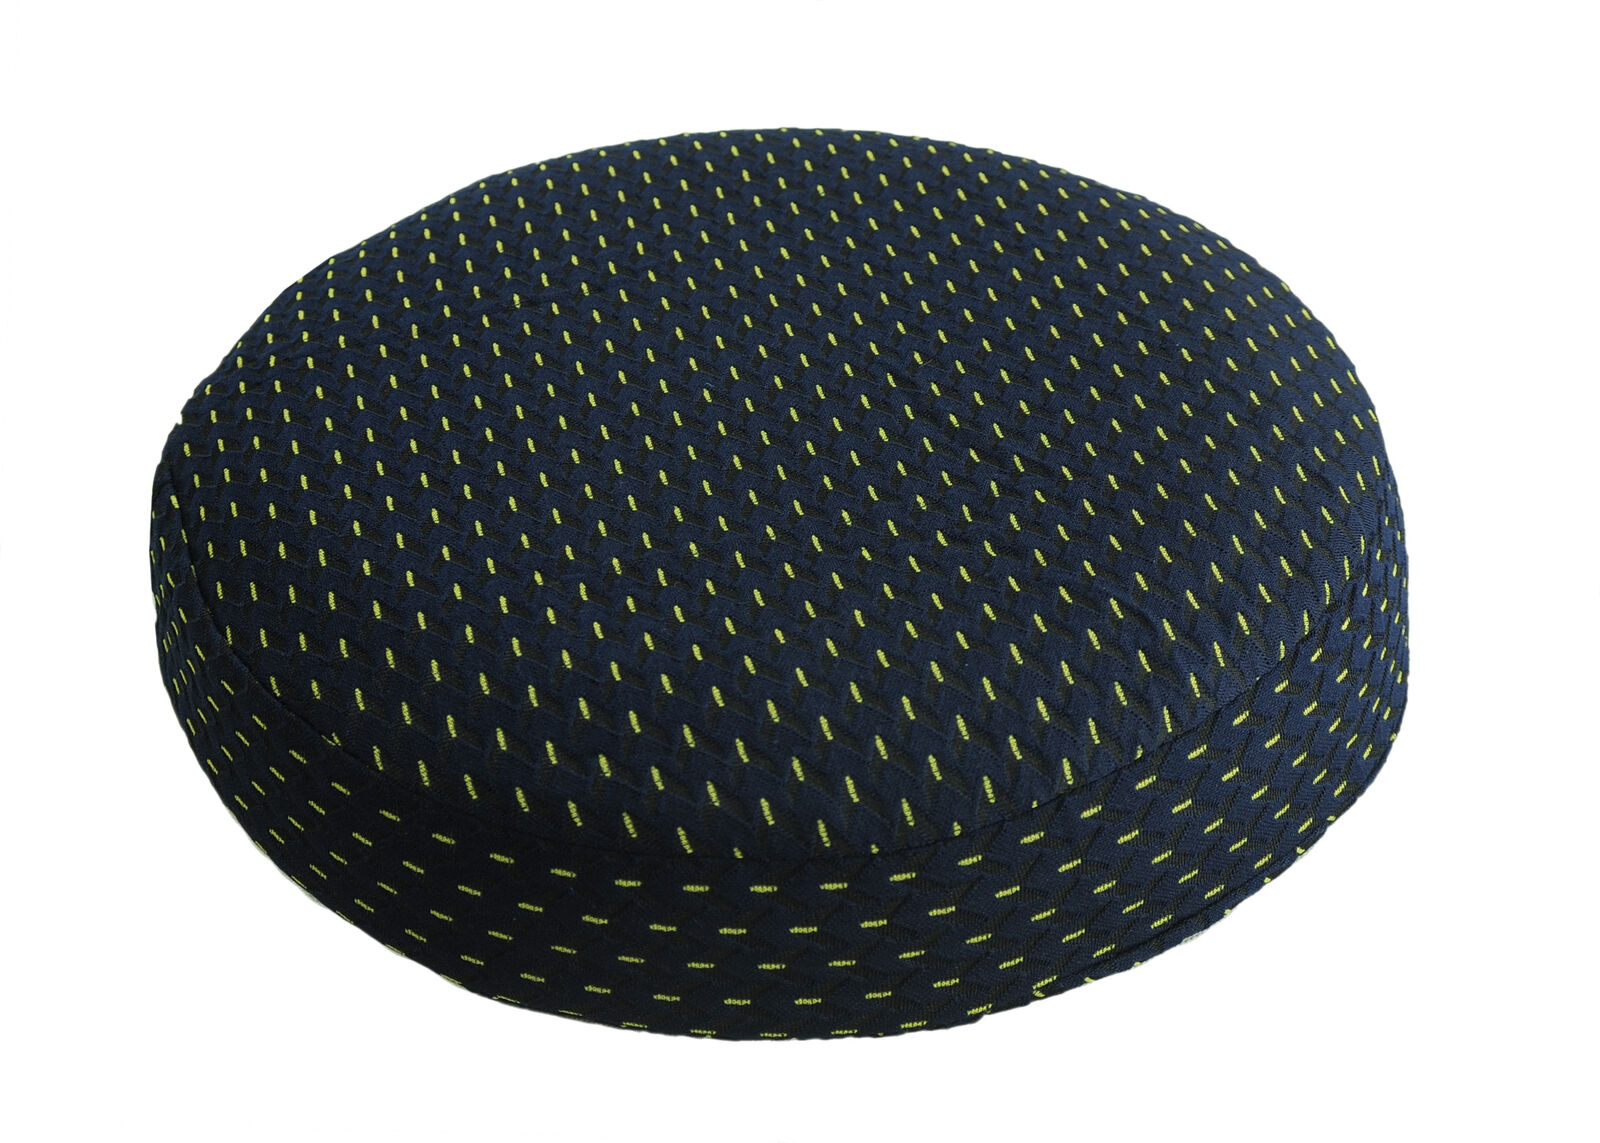 ObboMed Donut Seat Cushion with Magnet Therapy